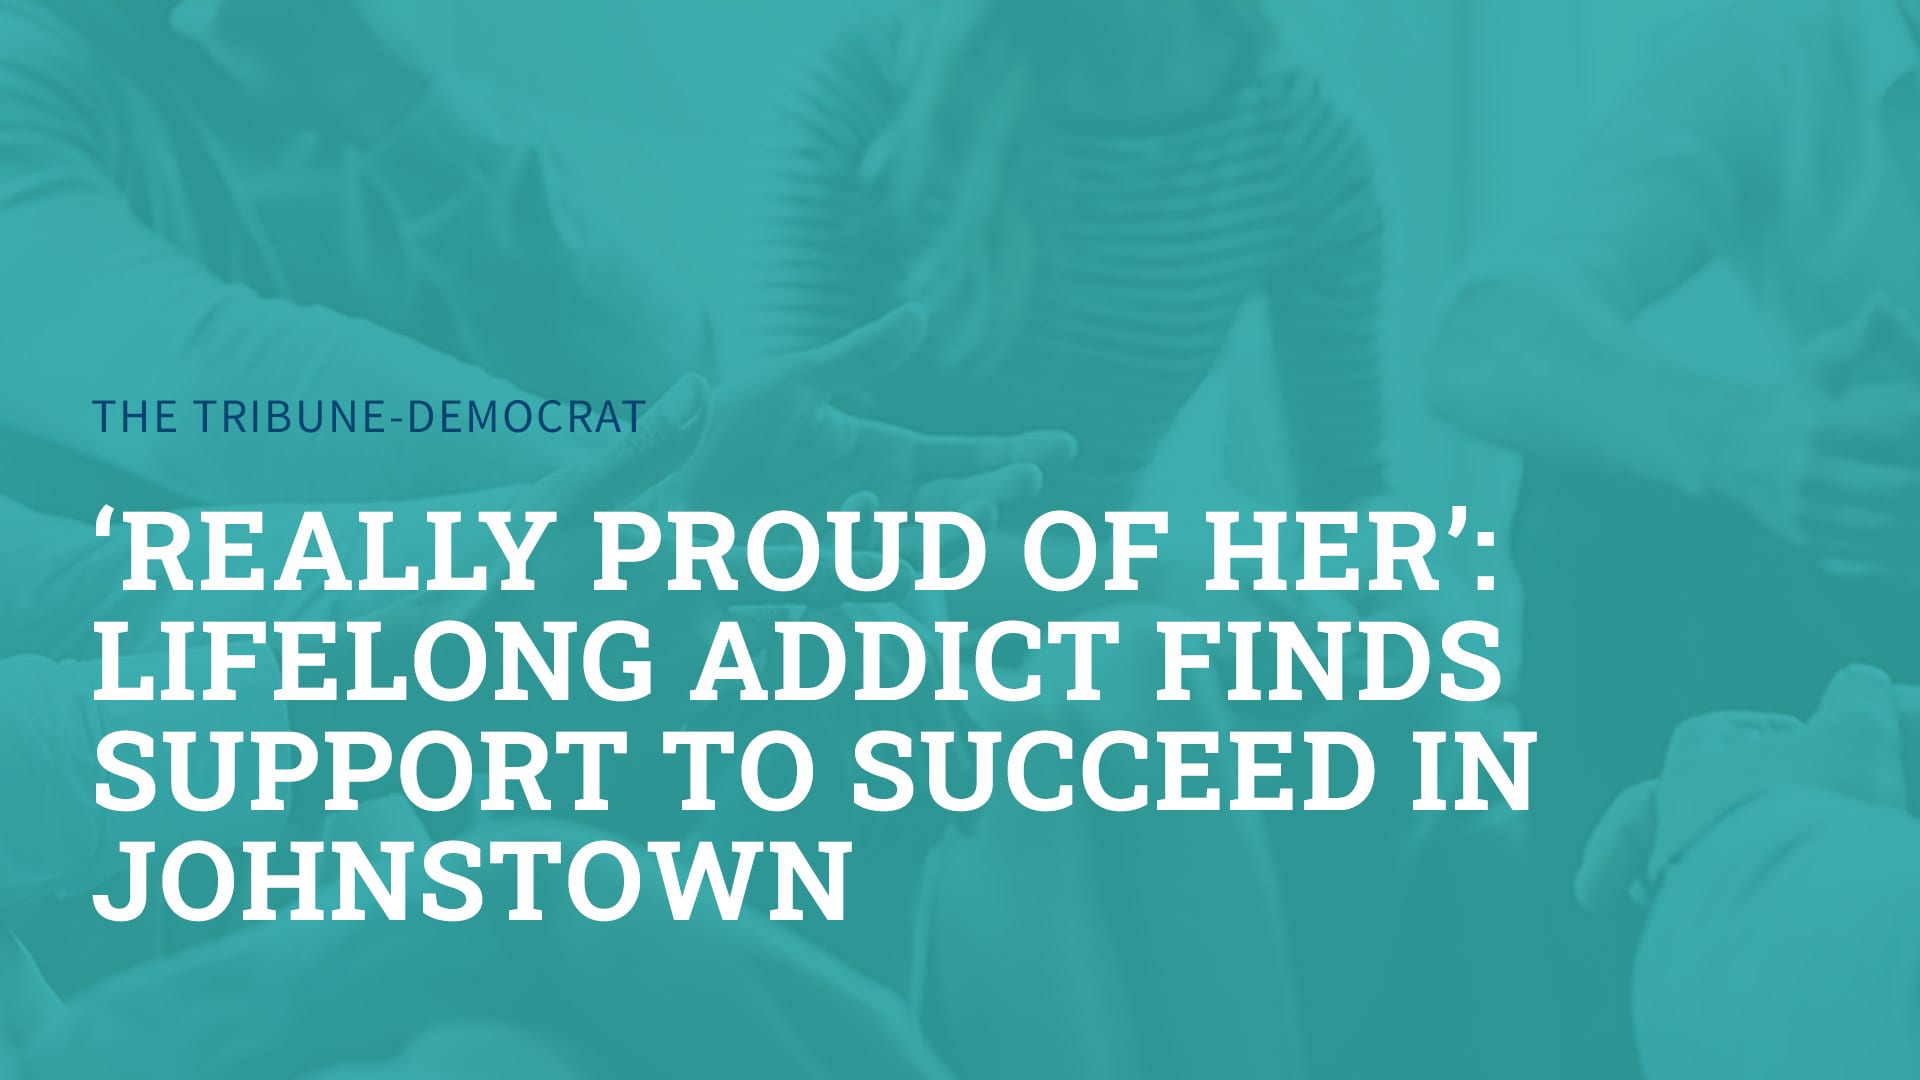 ‘Really Proud of Her’: Lifelong Addict Finds Support to Succeed in Johnstown